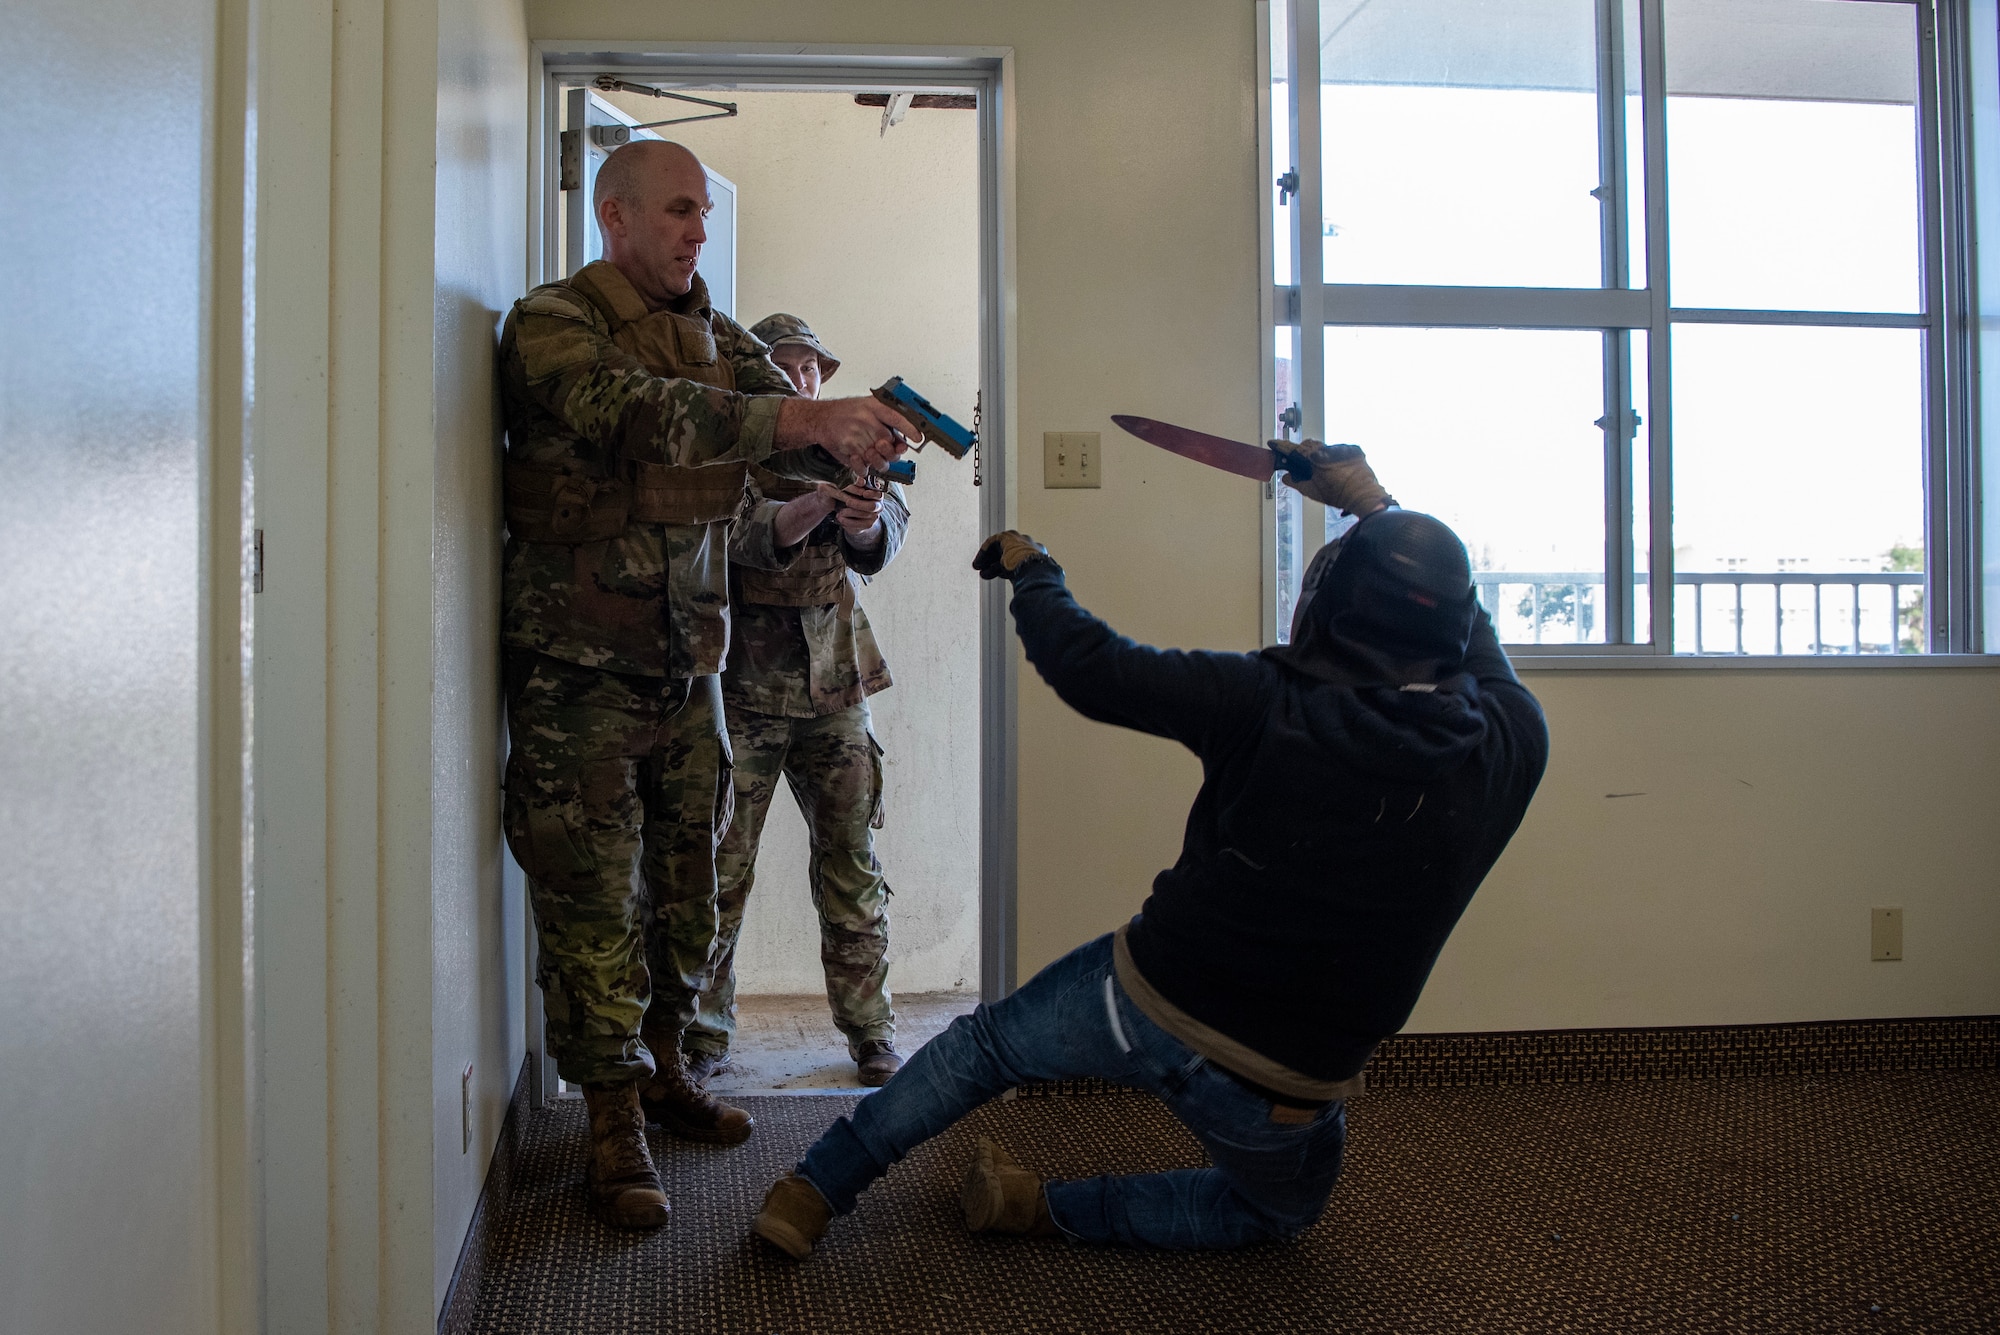 military members enter a room to fire blanks at fake stabbing scenario